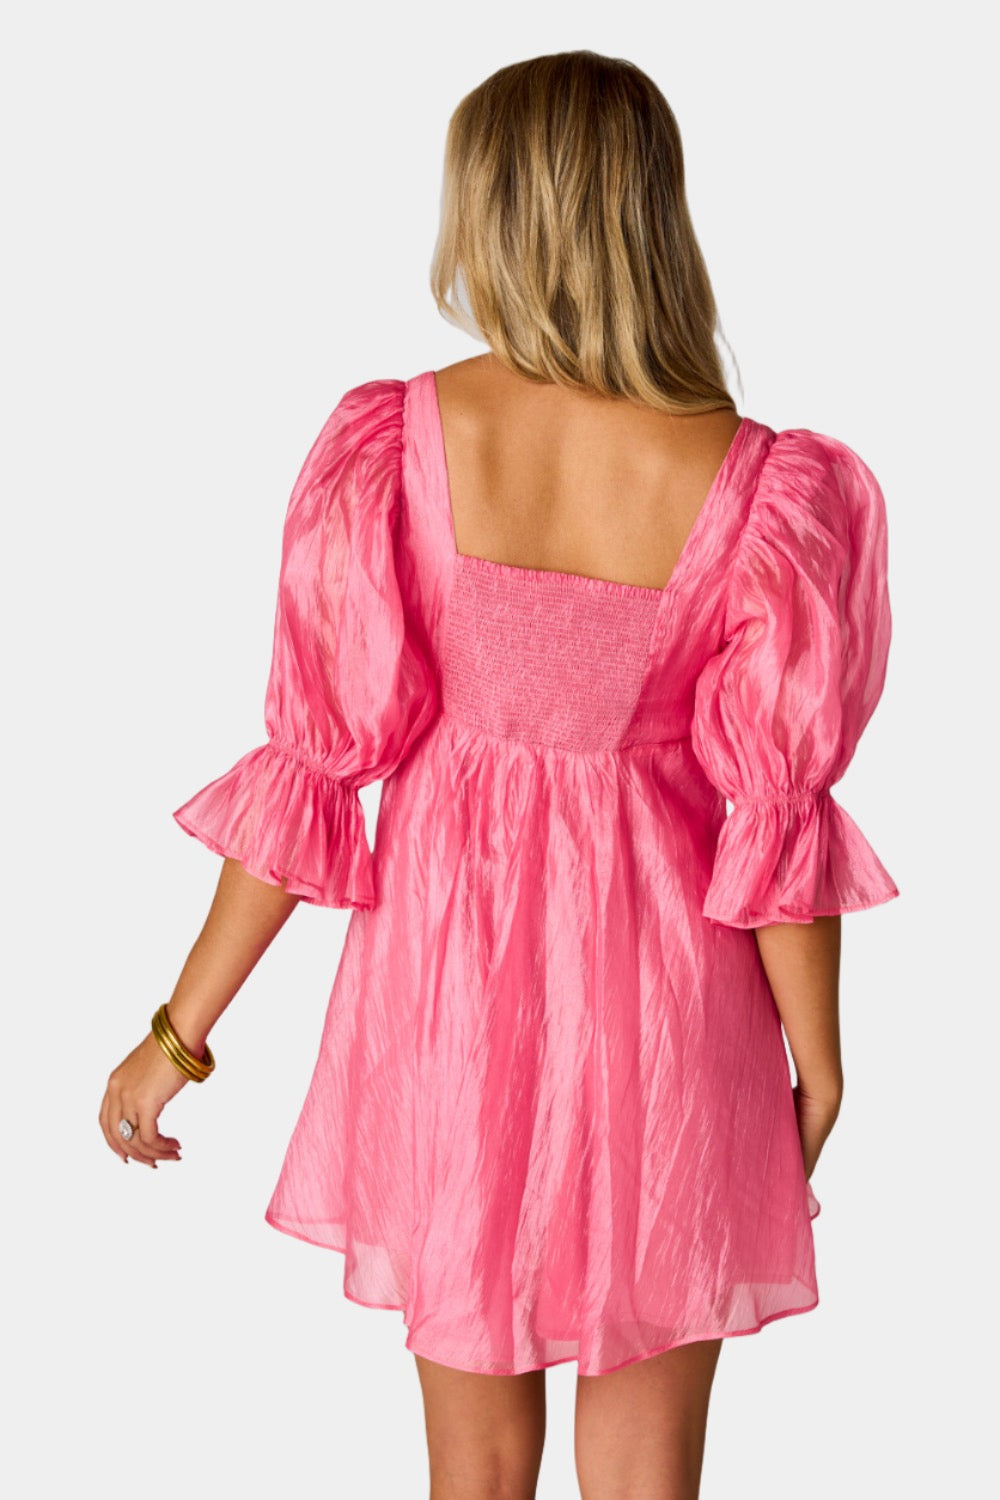 Ready To Party Babydoll Dress in Hot Pink